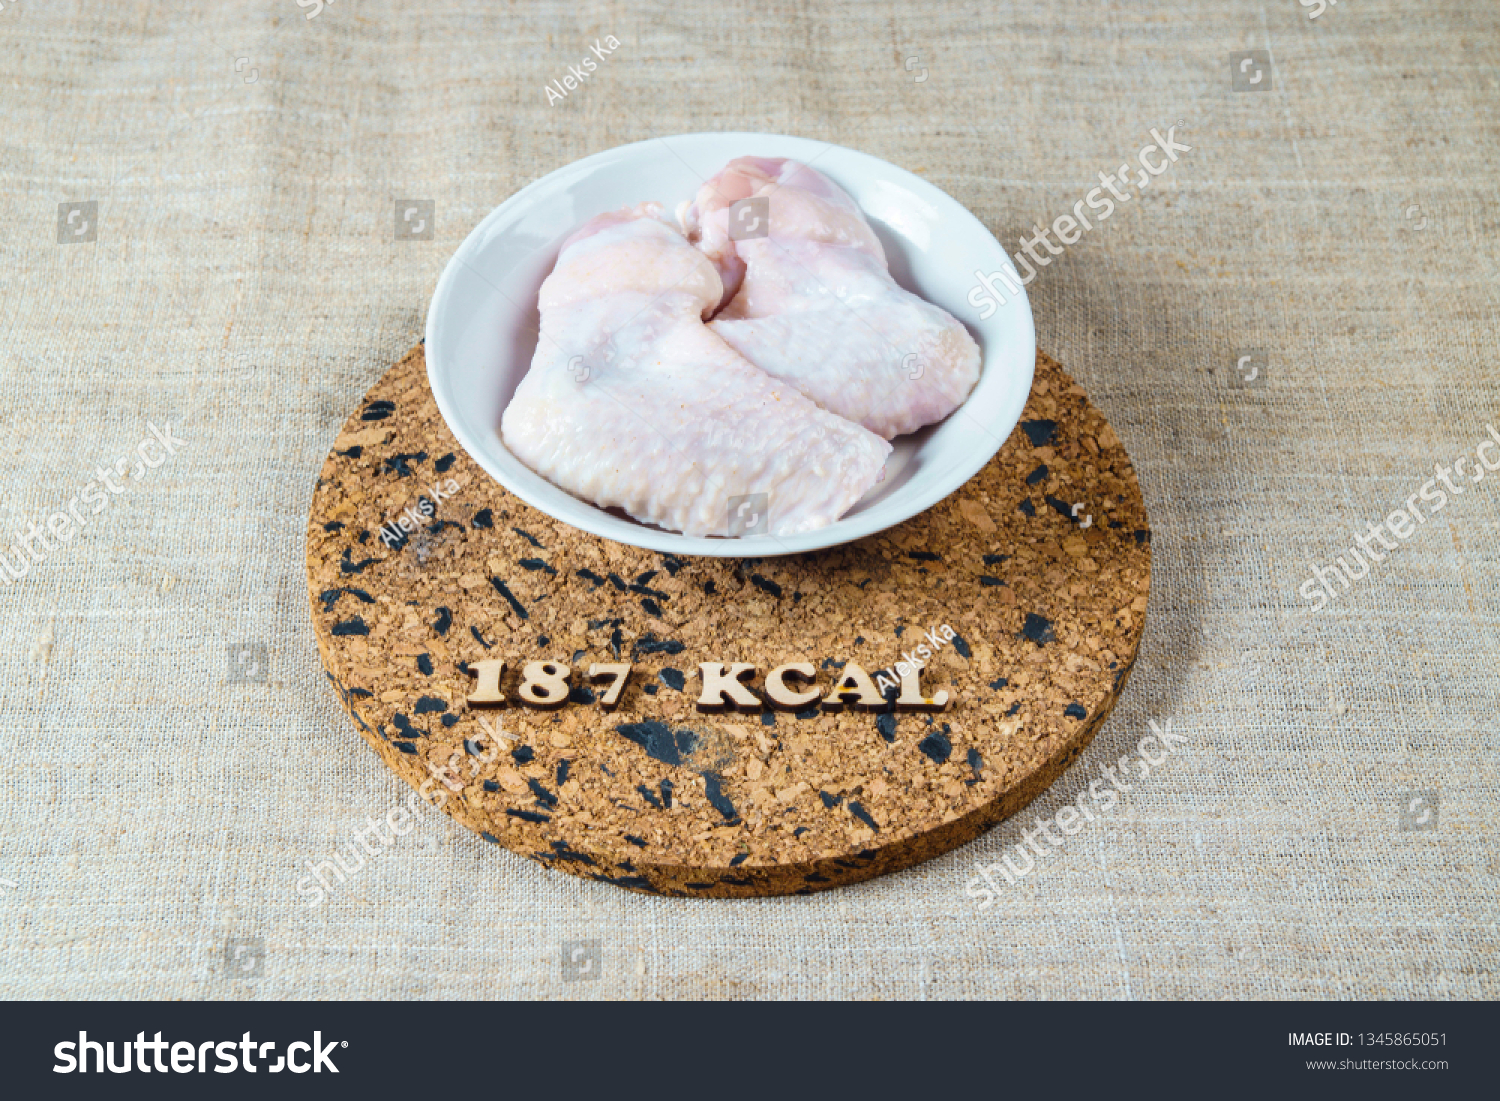 Calories Calculator Chicken Wings Kcal Stock Photo (Edit Now) 1345865051